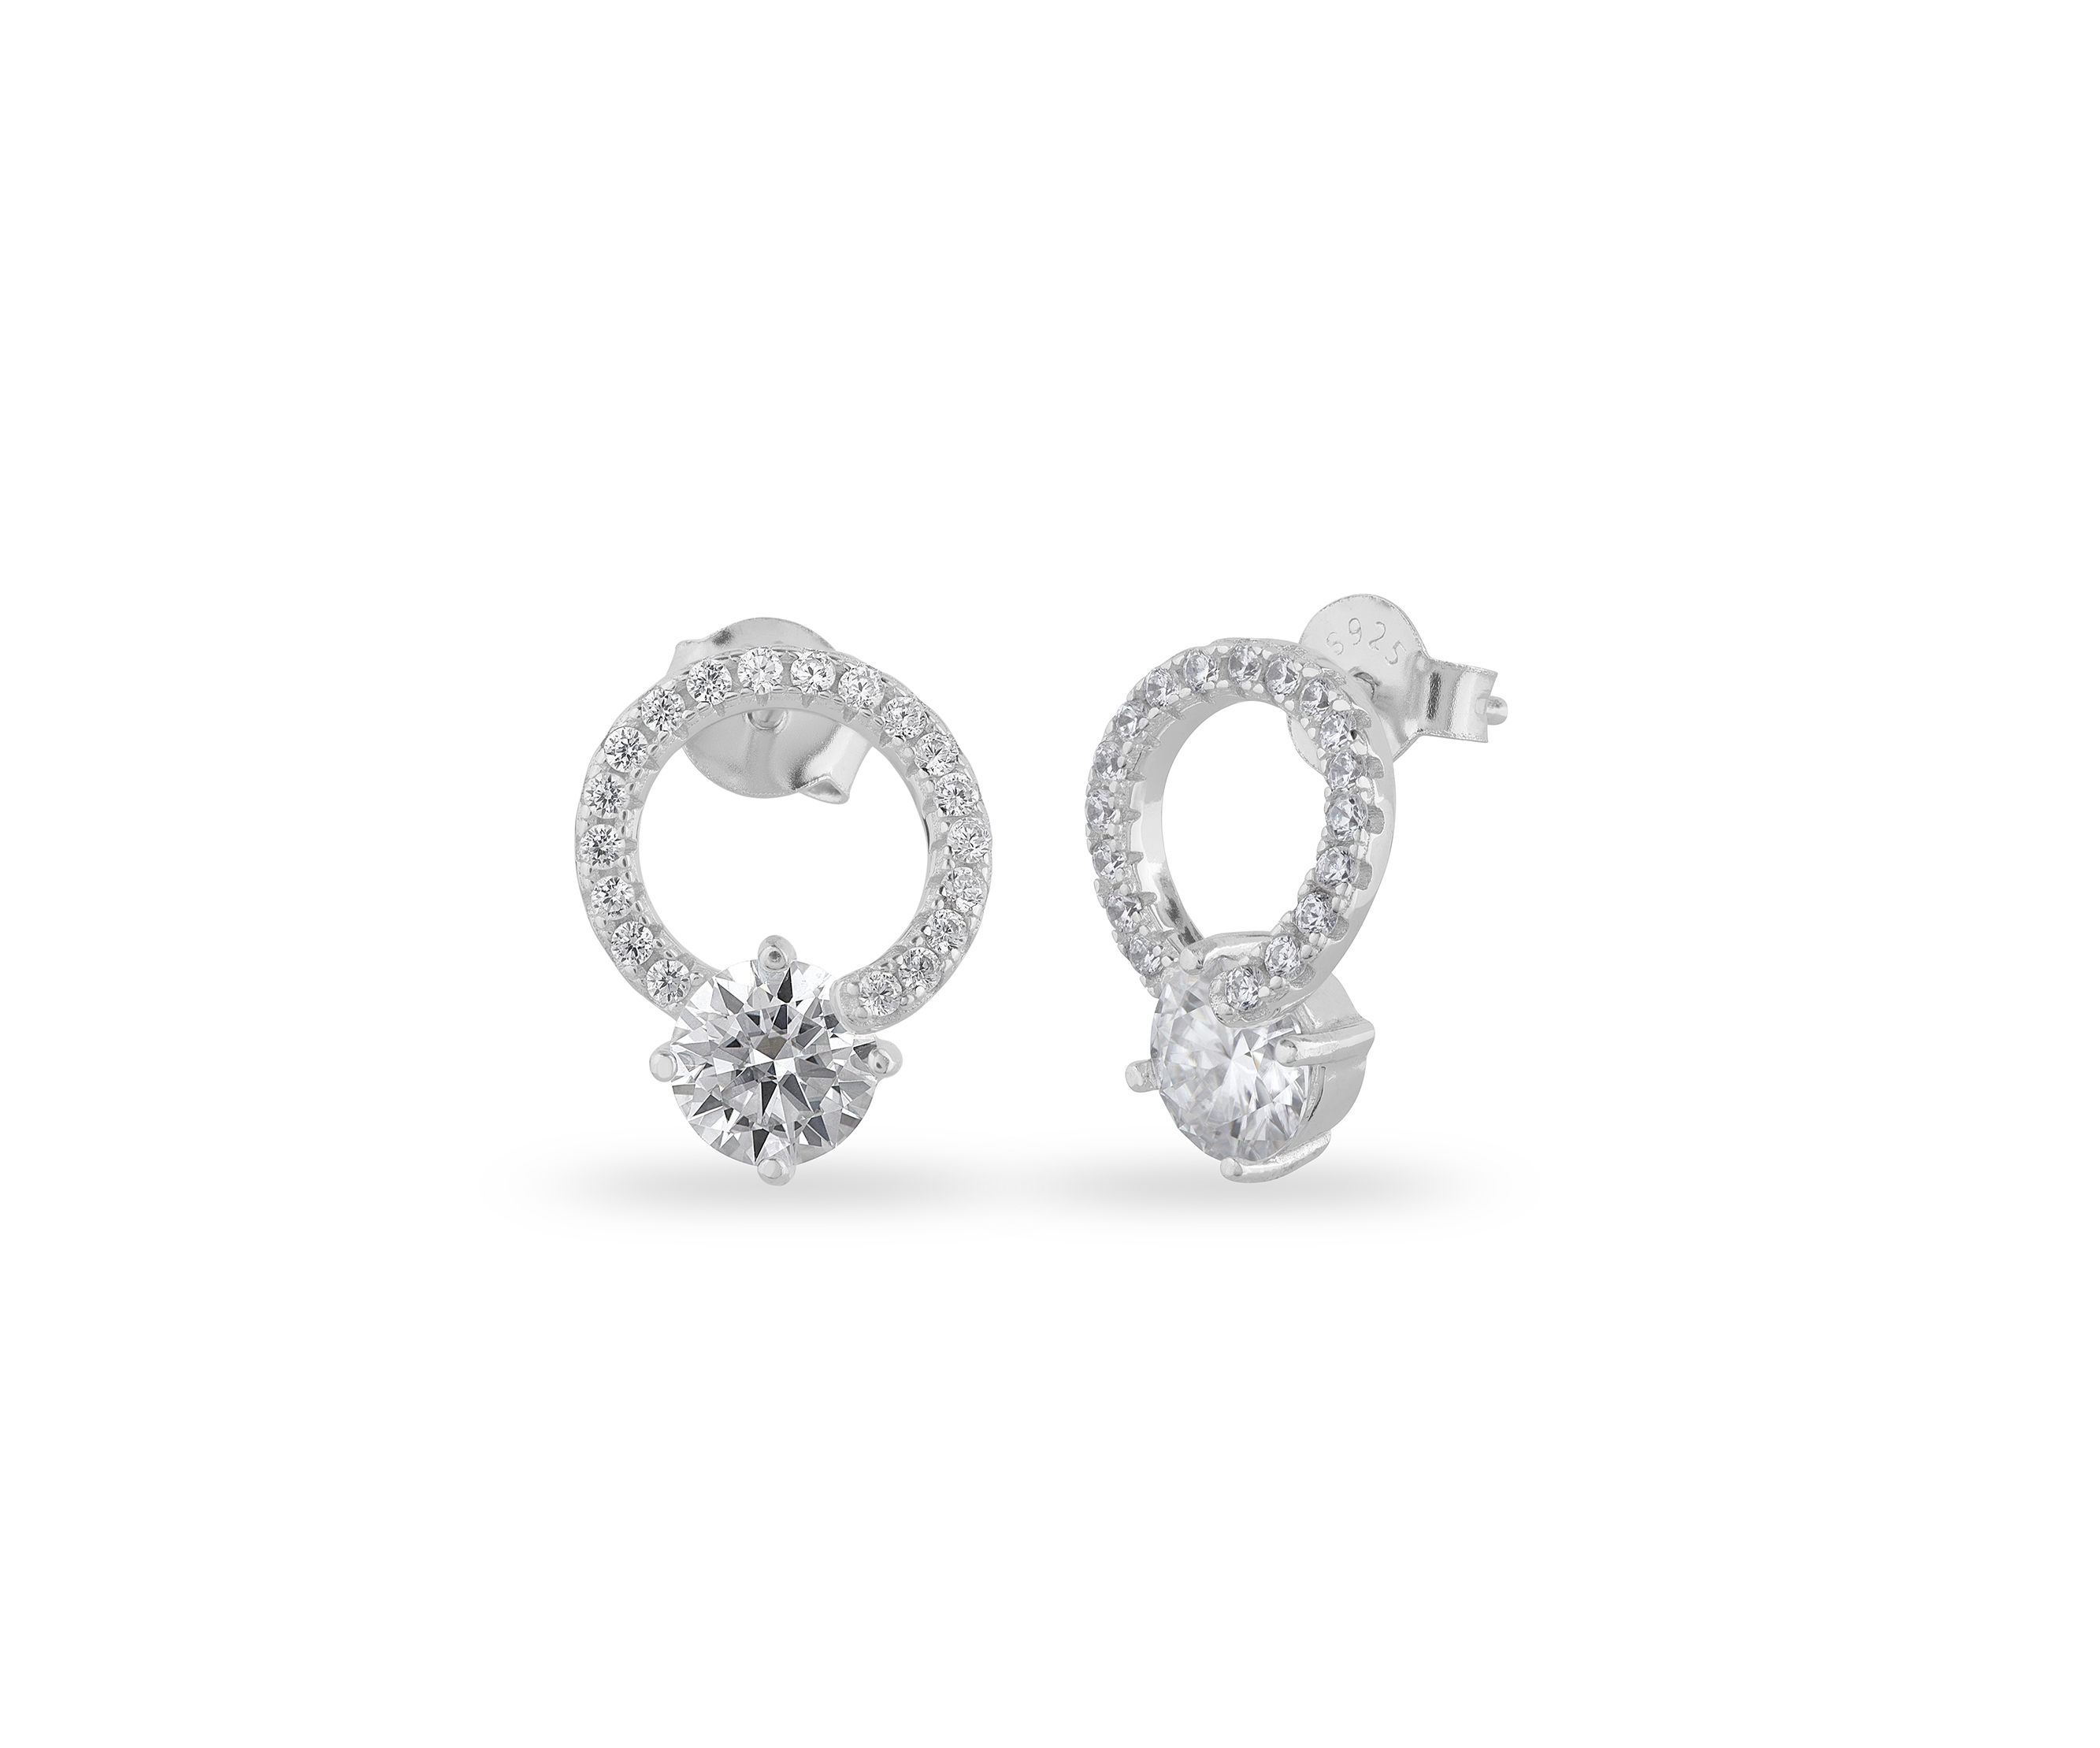 Best place to buy moissanite stud earrings India online - Anemoii